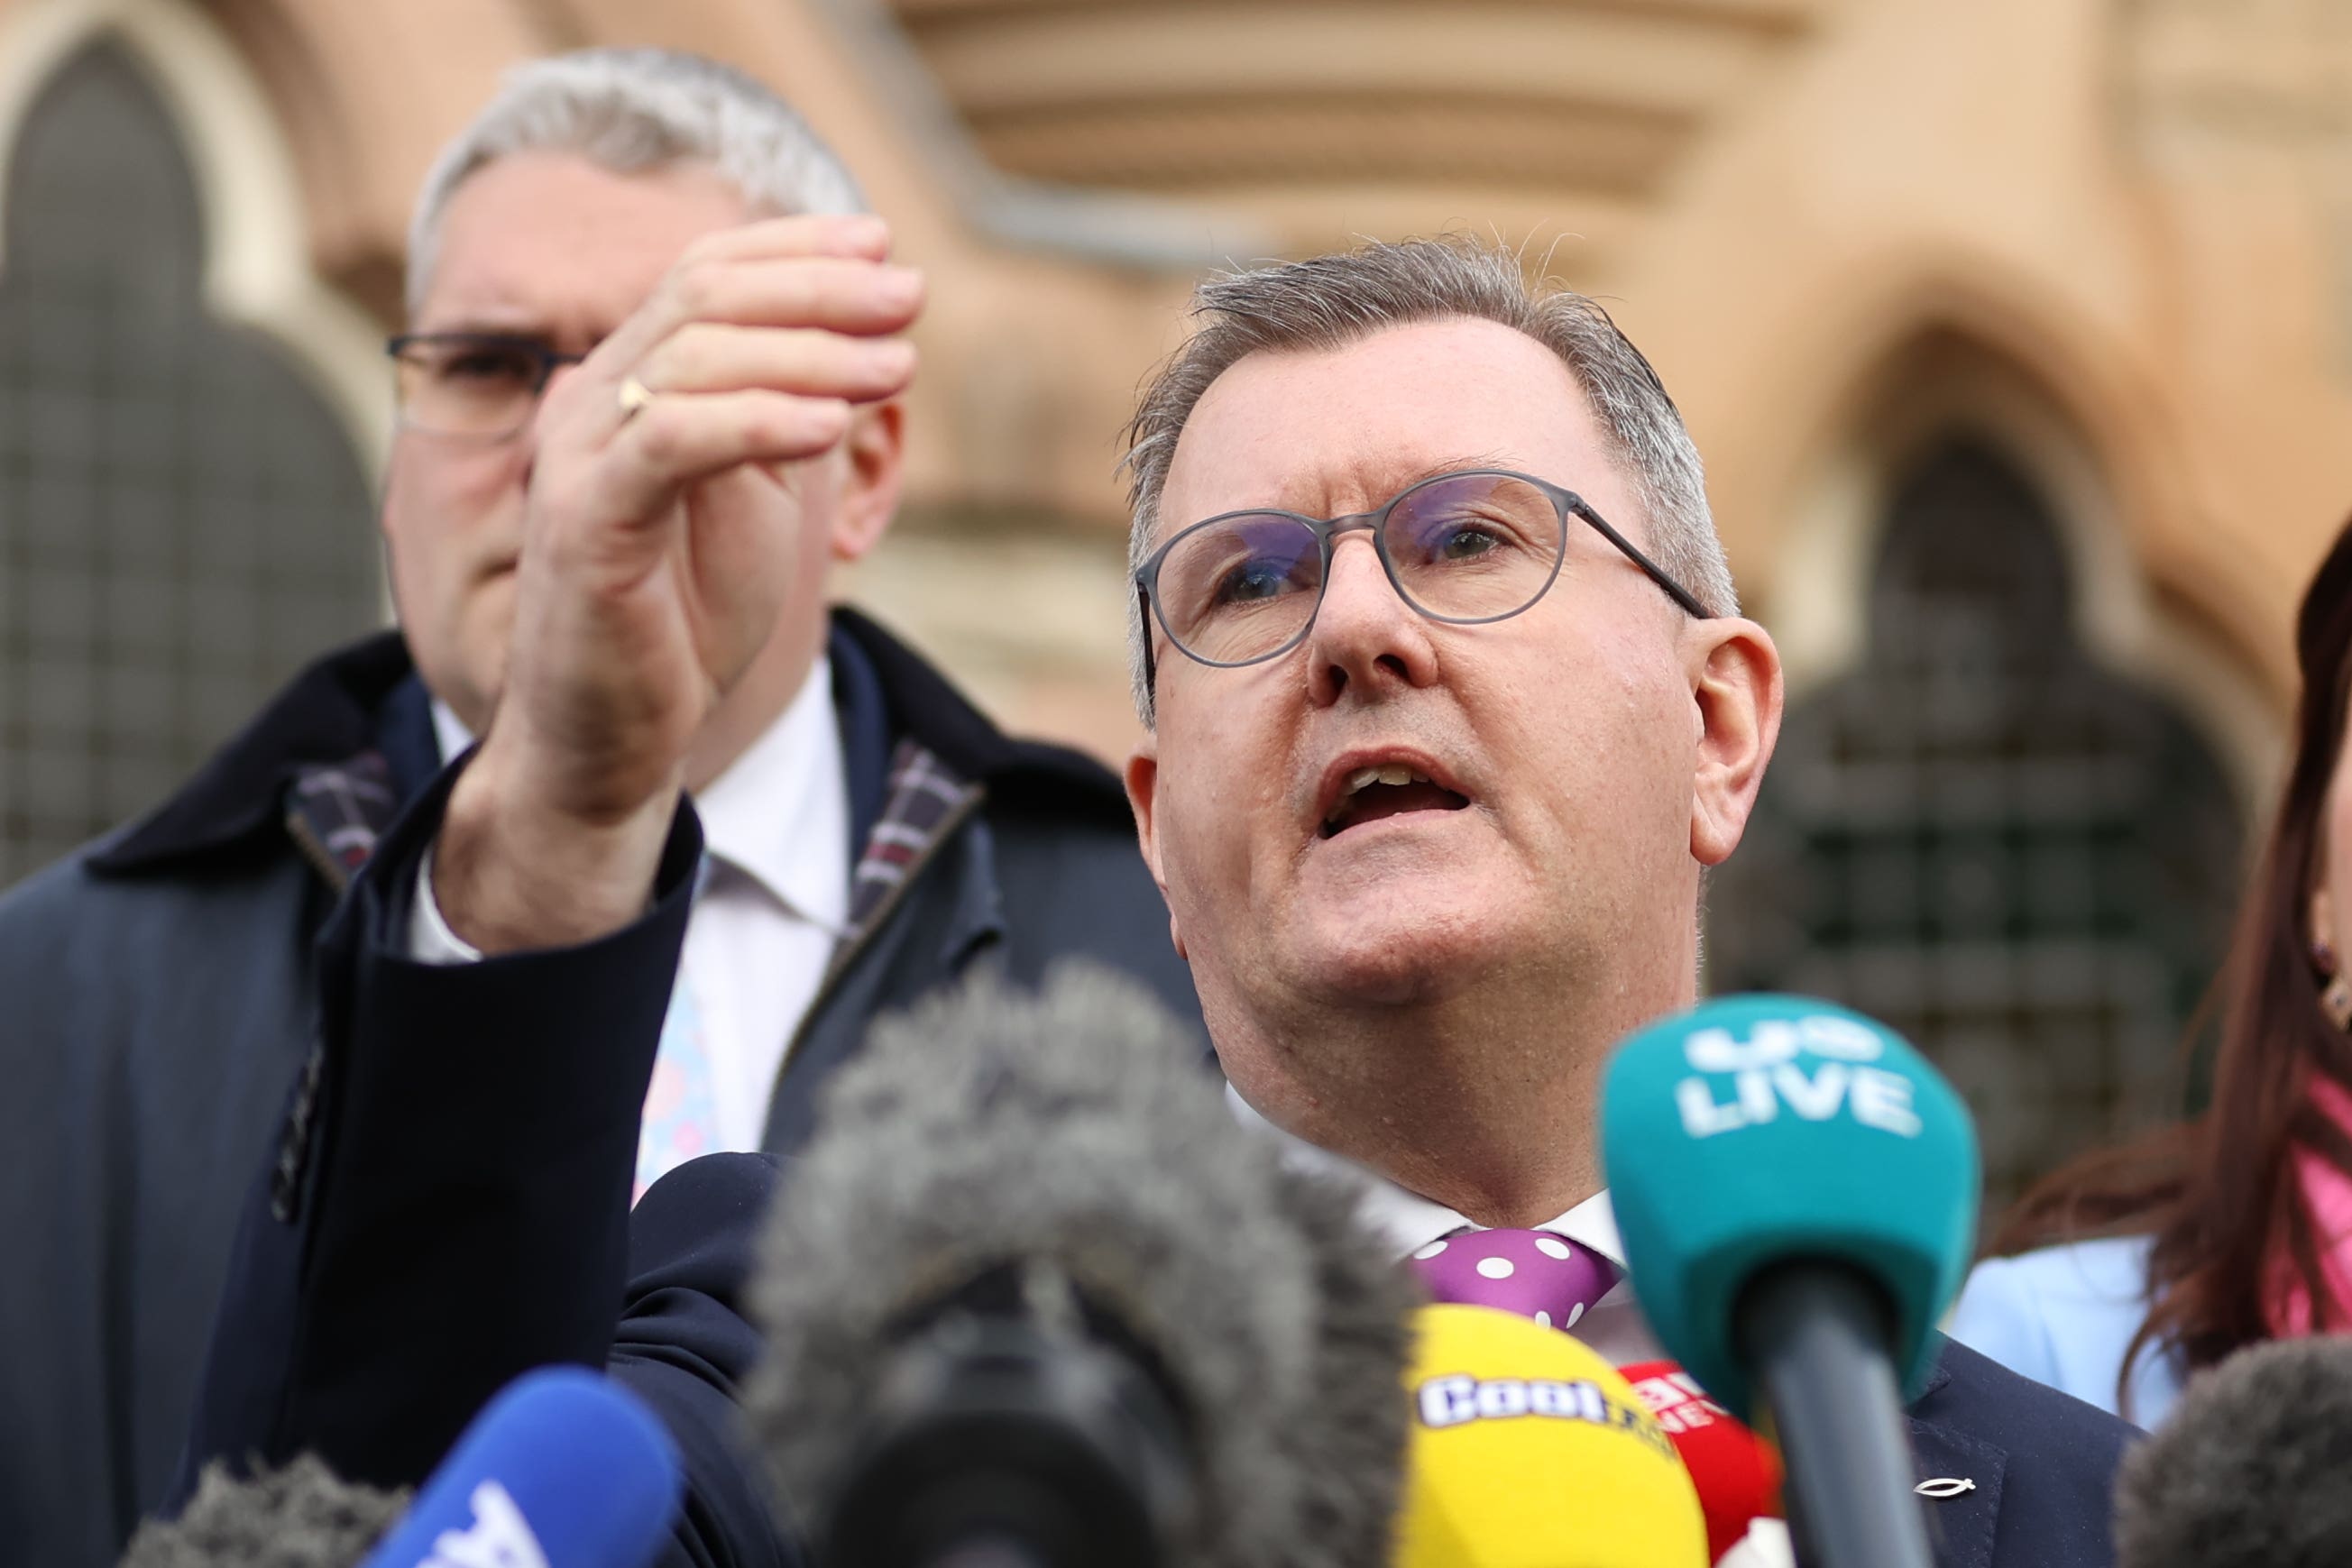 DUP leader Jeffrey Donaldson says party will ‘take its time’ considering deal